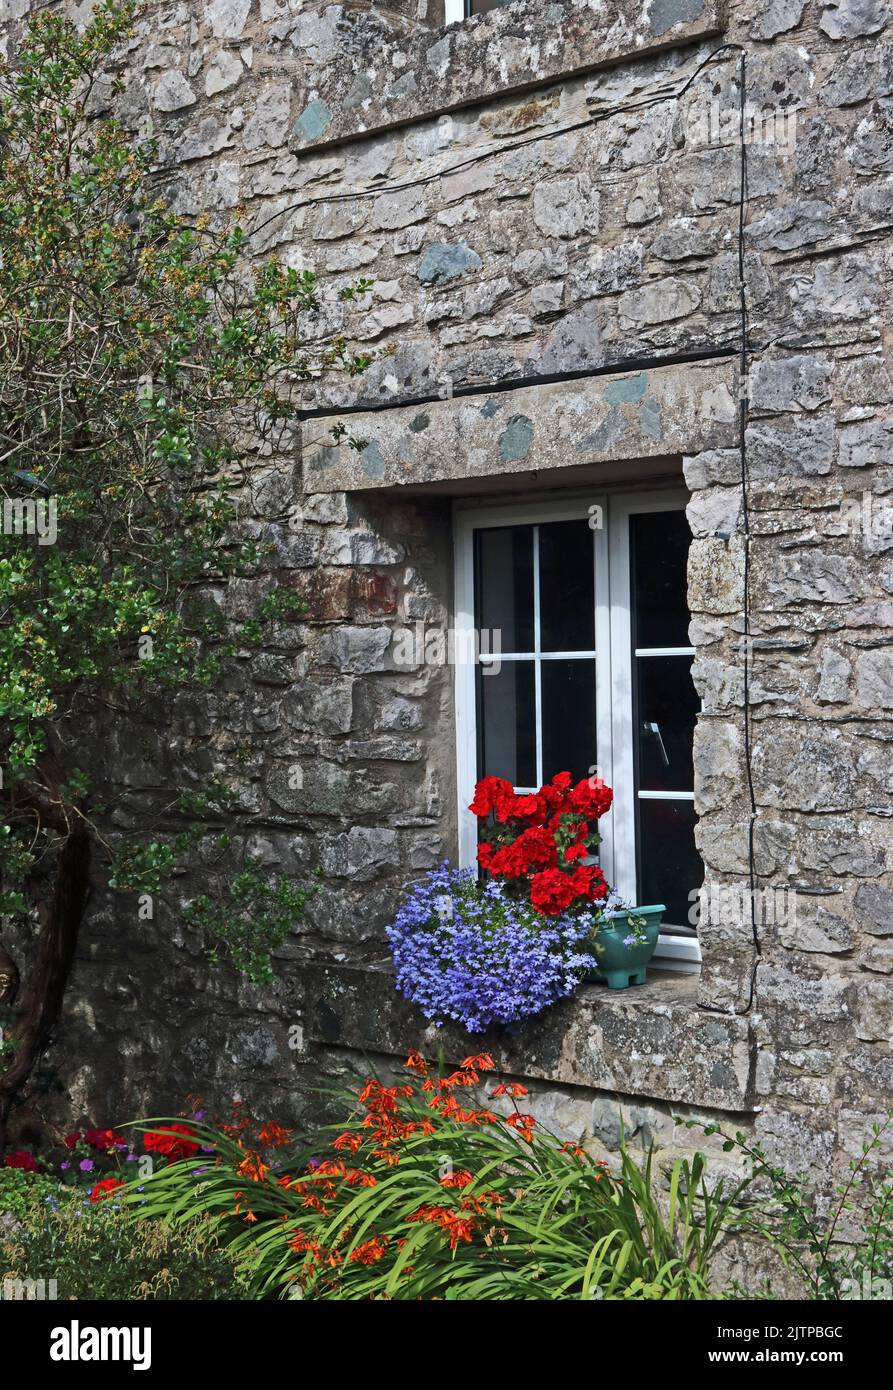 Colourful plants in border and on window ledge of stone house Stock Photo